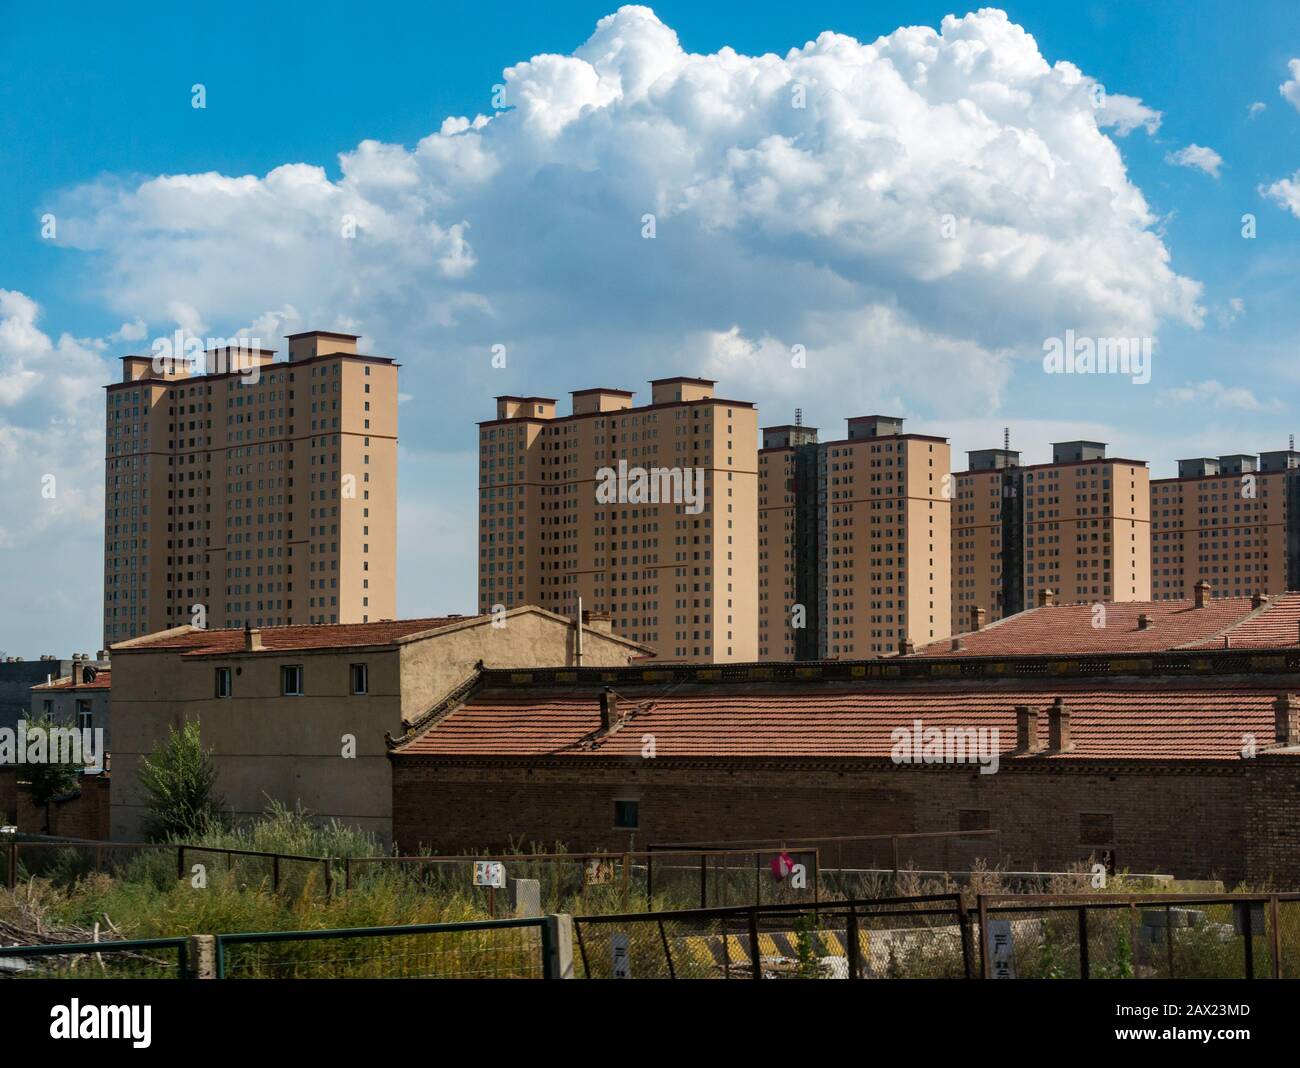 High rise apartment tower block buildings above traditional old buildings seen from Trans-Mongolian Express train, Jining, China, Asia Stock Photo